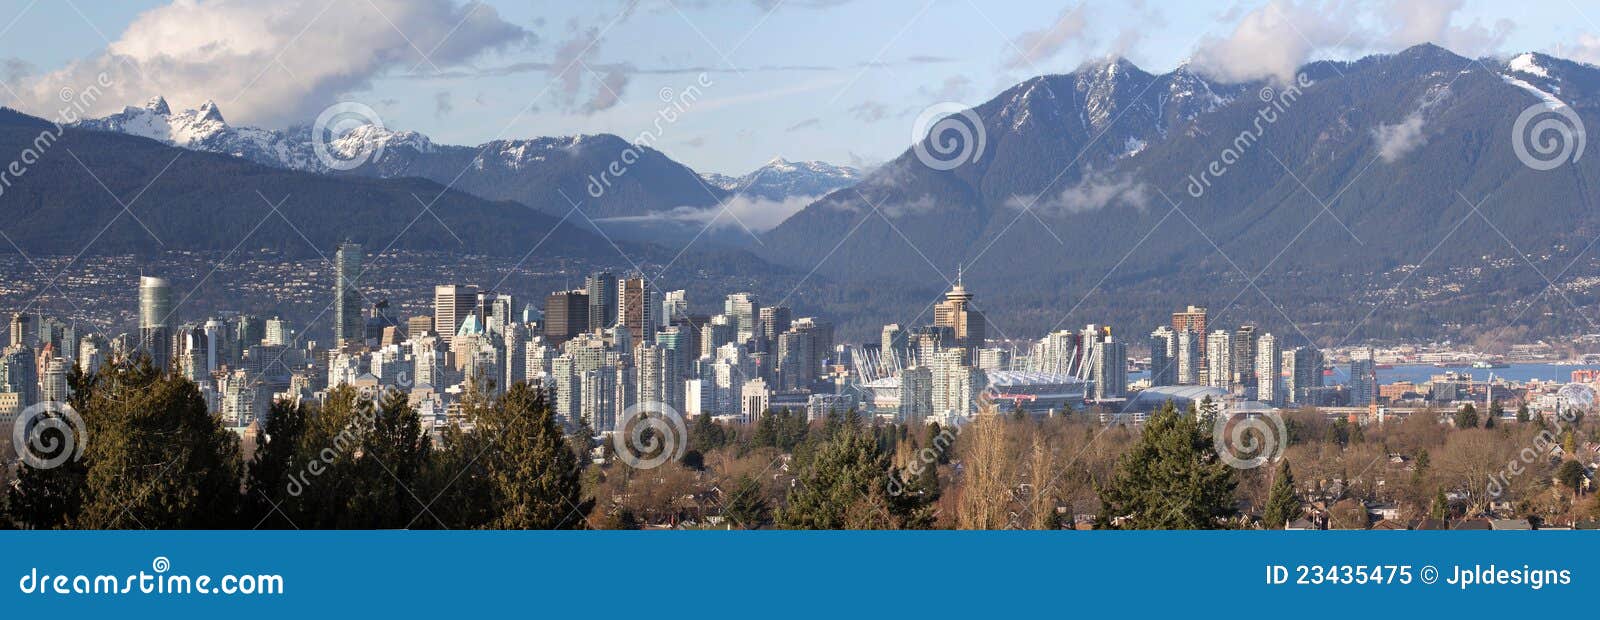 vancouver bc city skyline and mountains